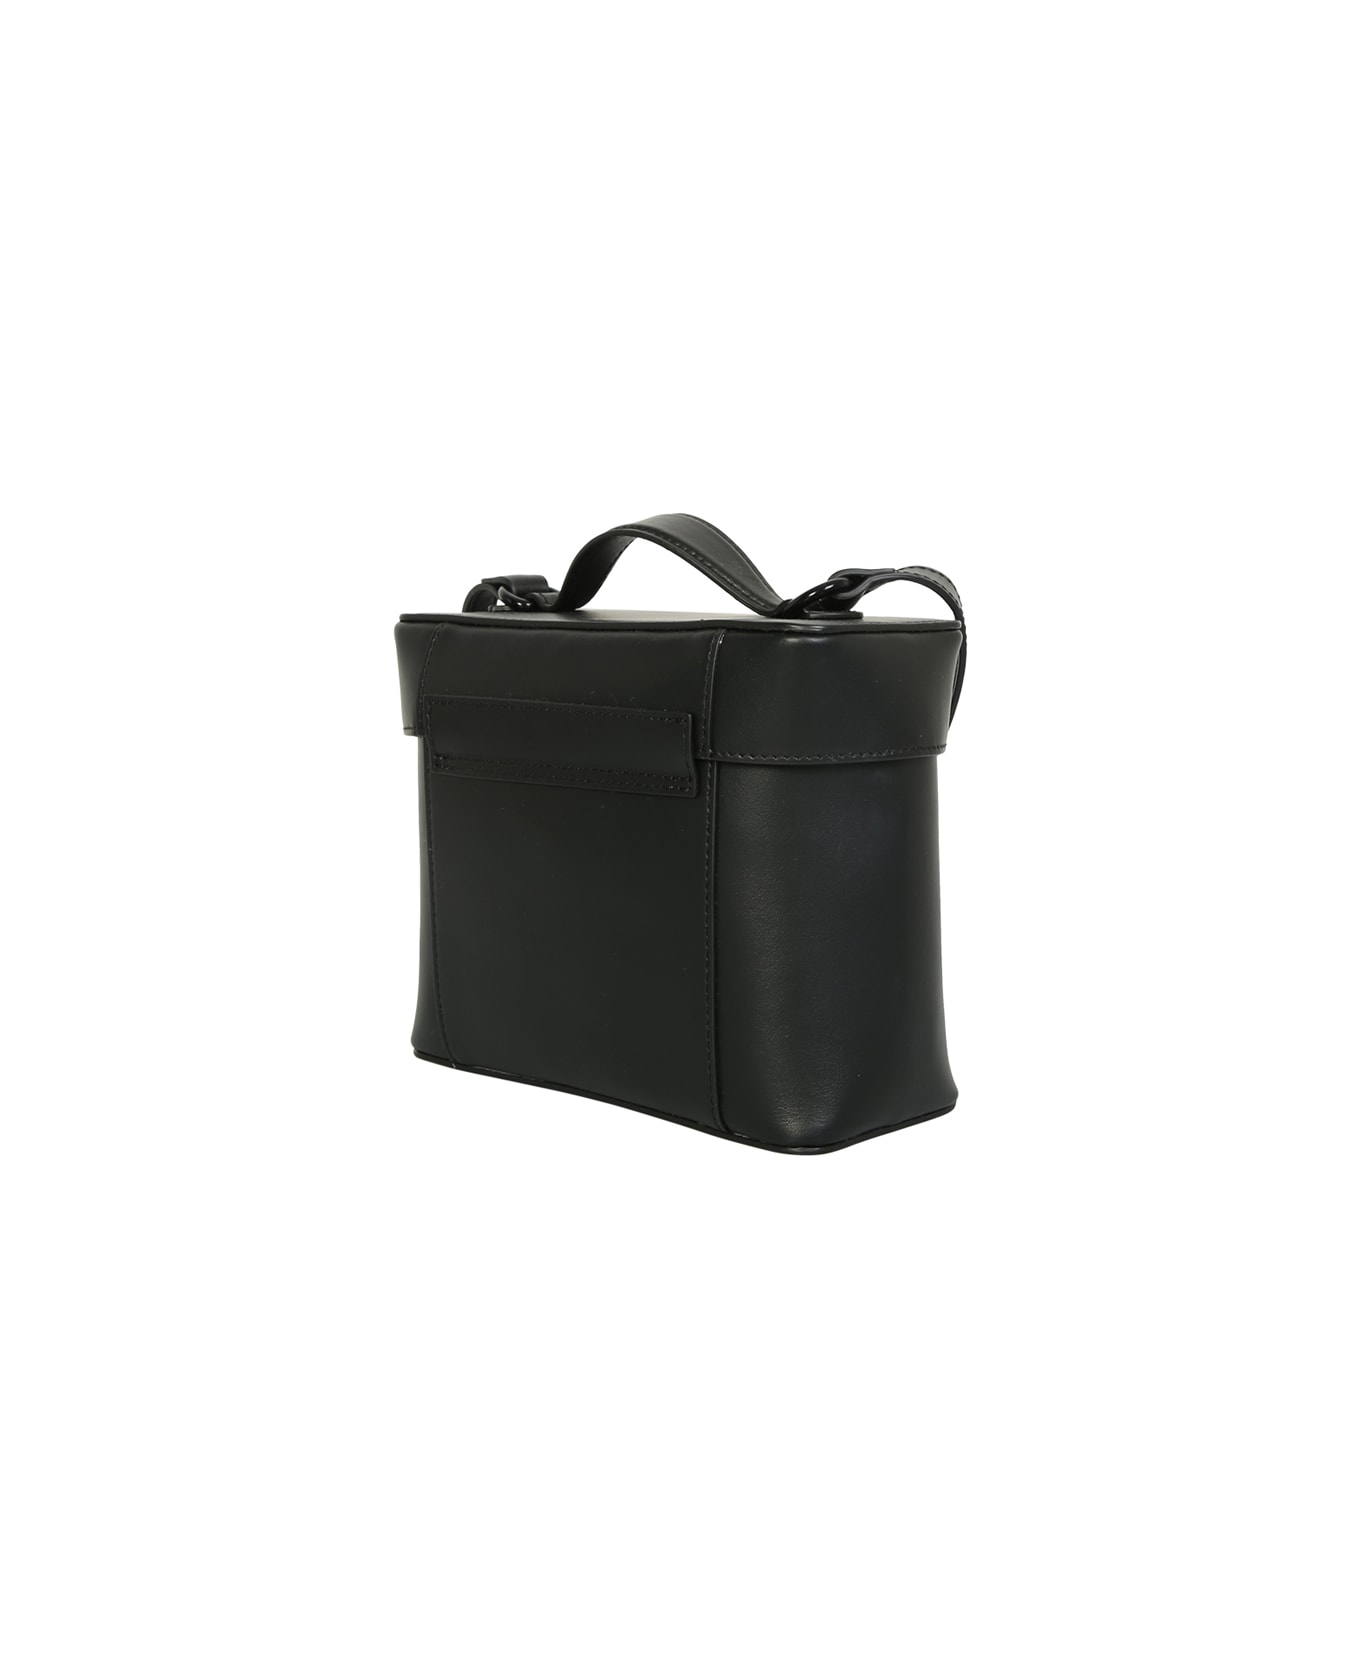 GIA BORGHINI Combining Practicality With Style, Gia Borghini Present This Tote Bag Featuring A Boxy Silhouette - Black トートバッグ